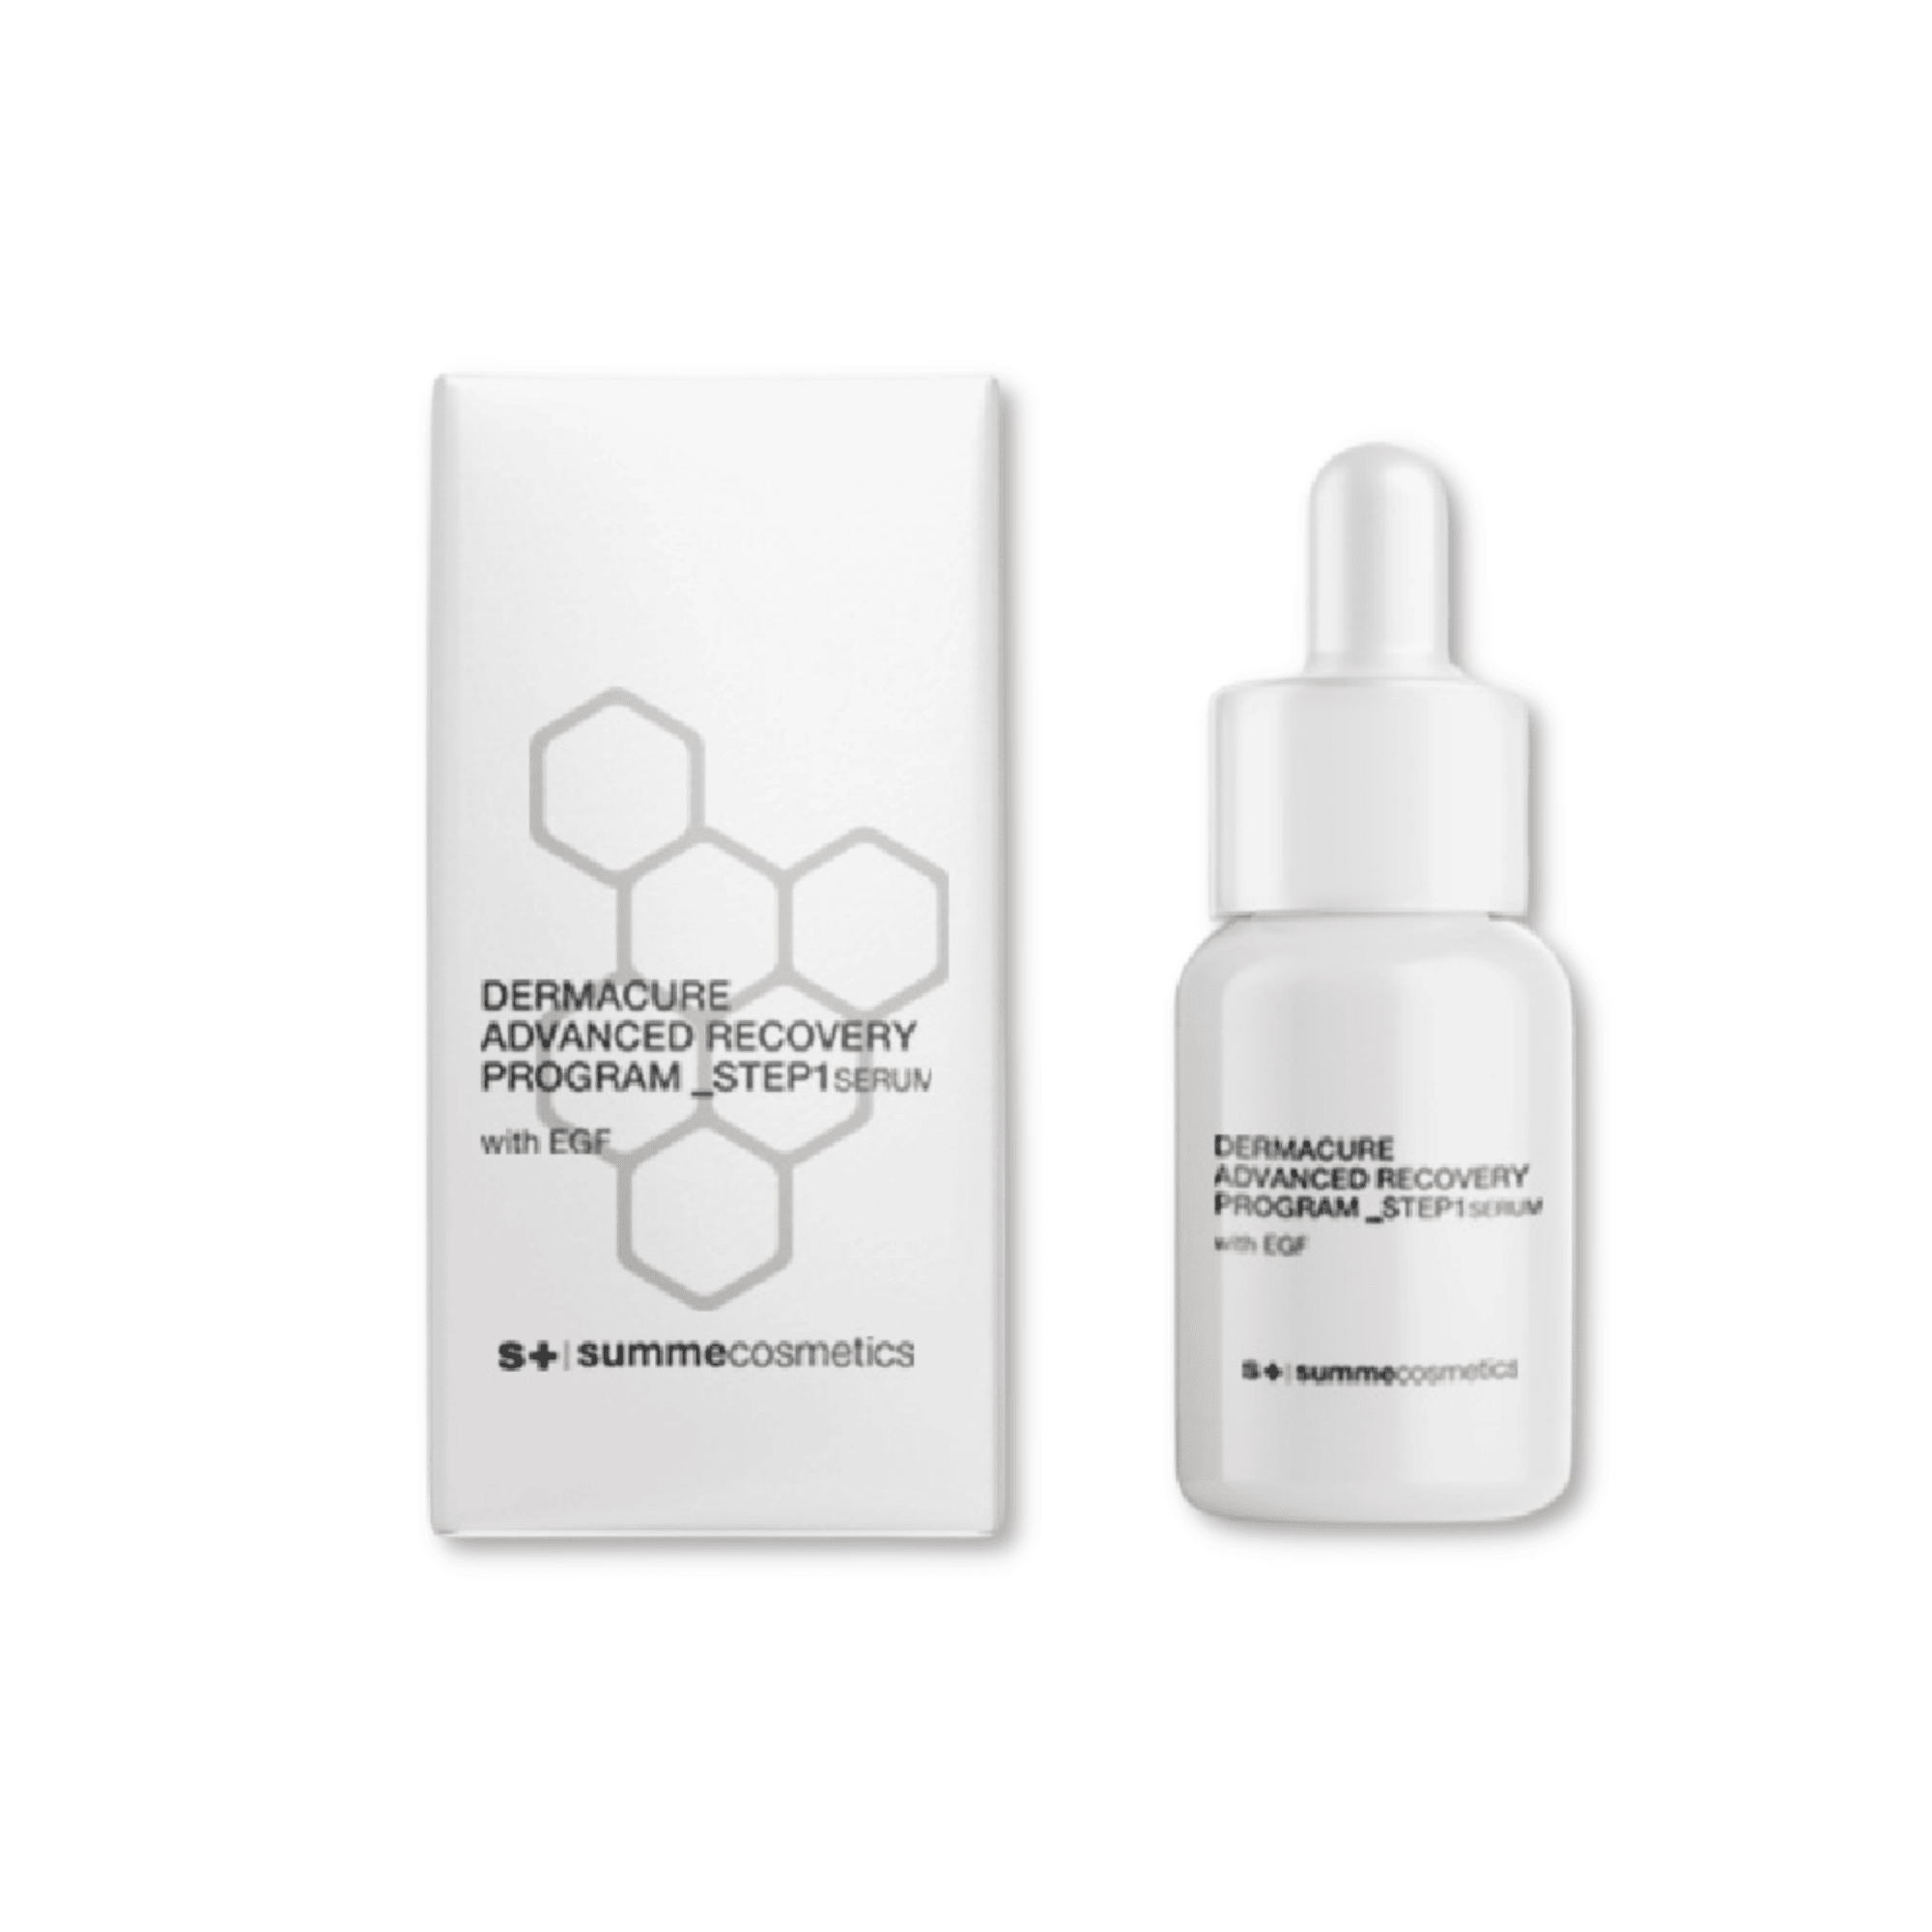 Summe Cosmetics Dermacure - Advanced Recovery Program Step 1 Serum